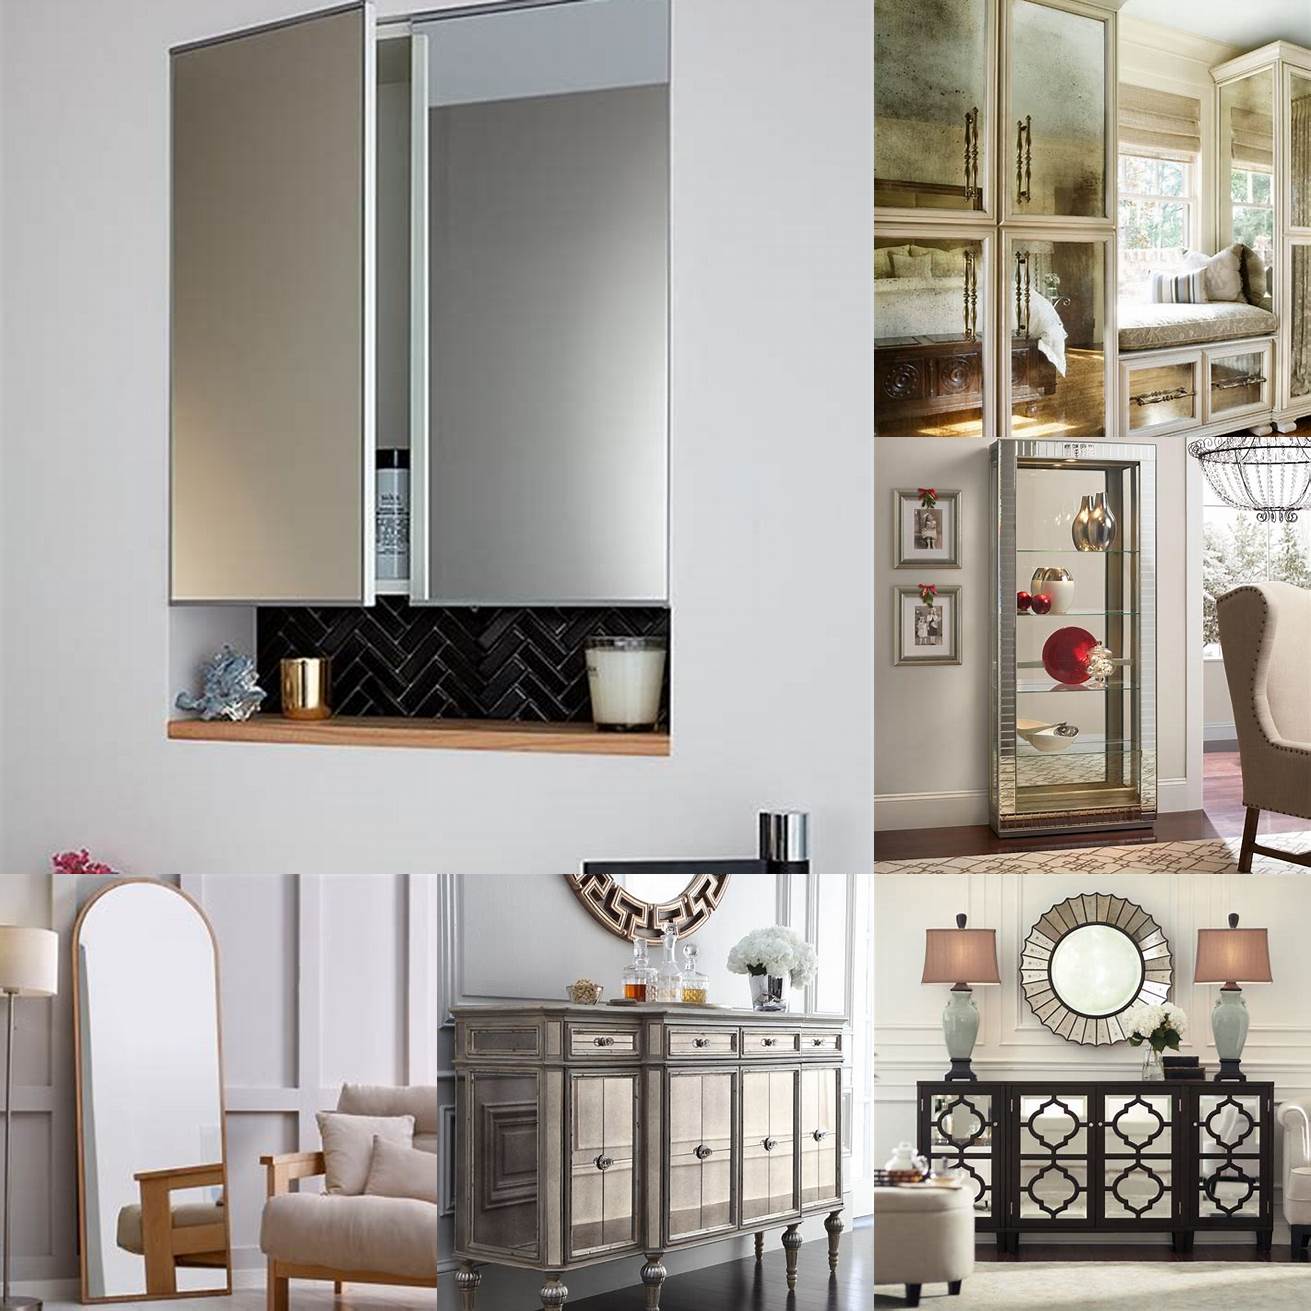 A mirrored cabinet adds functionality and reflects light making the room feel brighter and more spacious